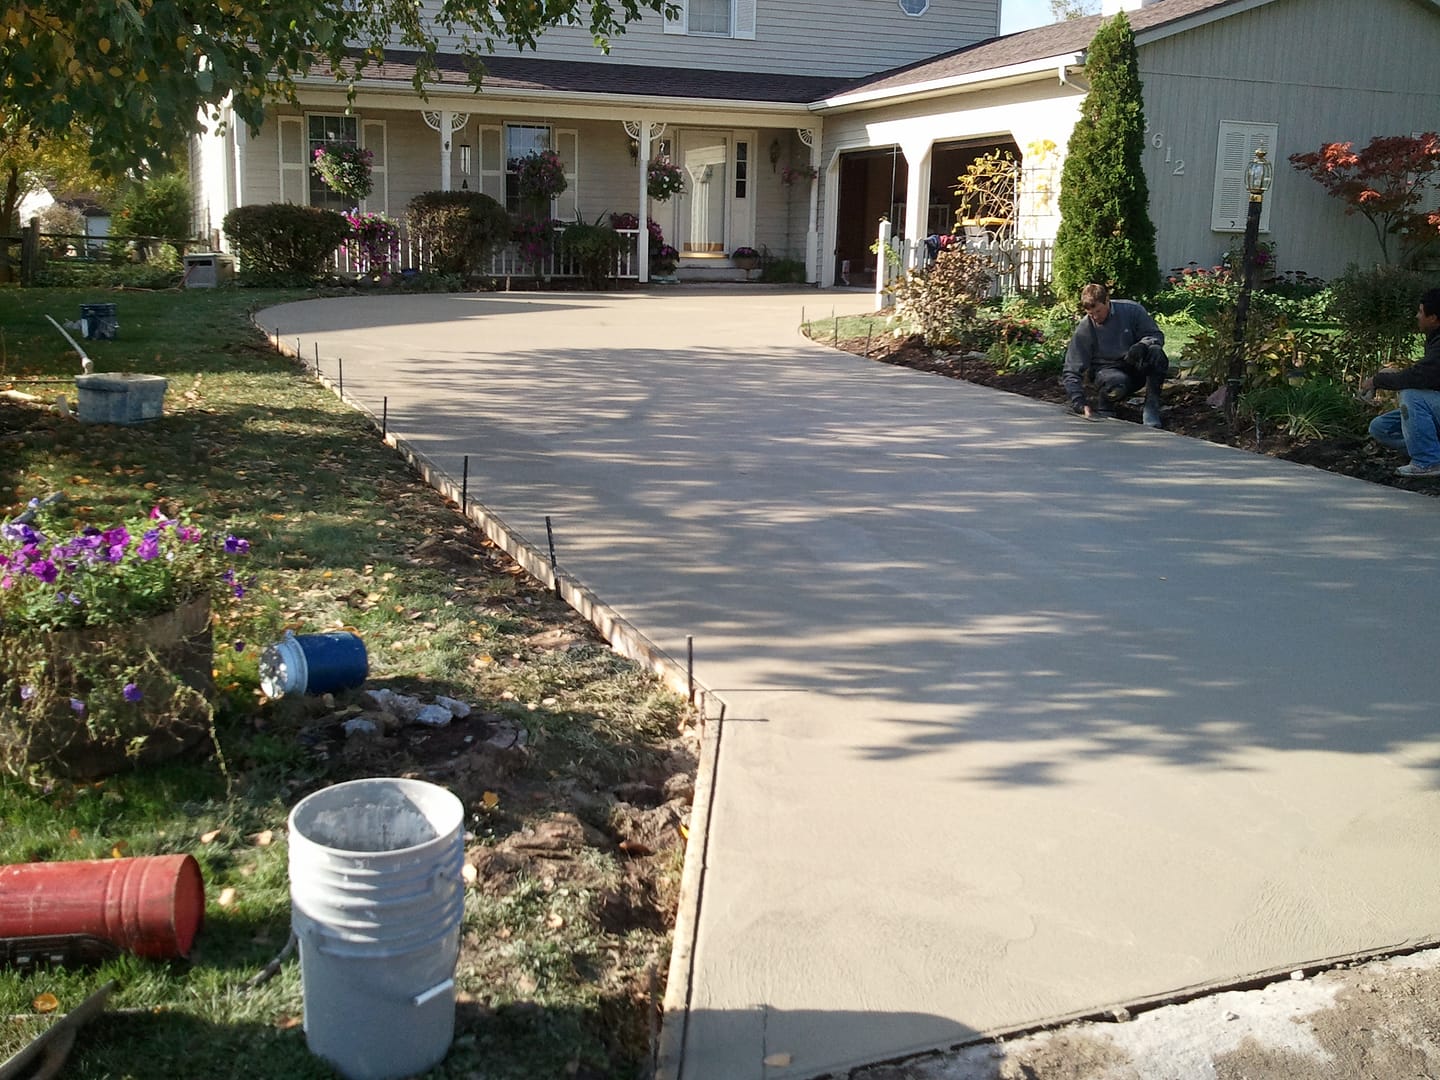 Driveways and Garages